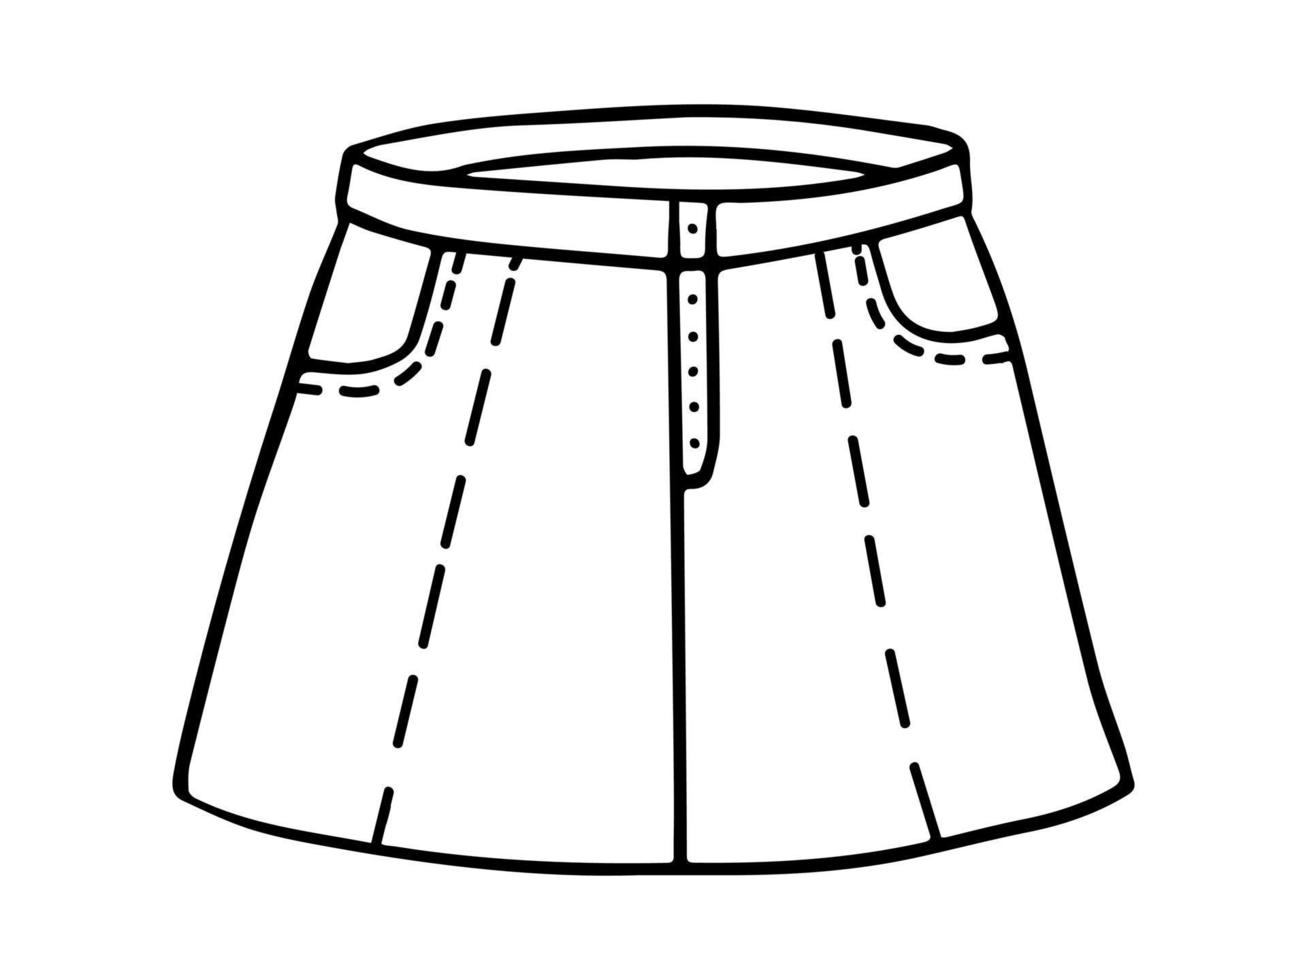 Boho skirt in hand drawn doodle style. Vector illustration. Women clothes element.